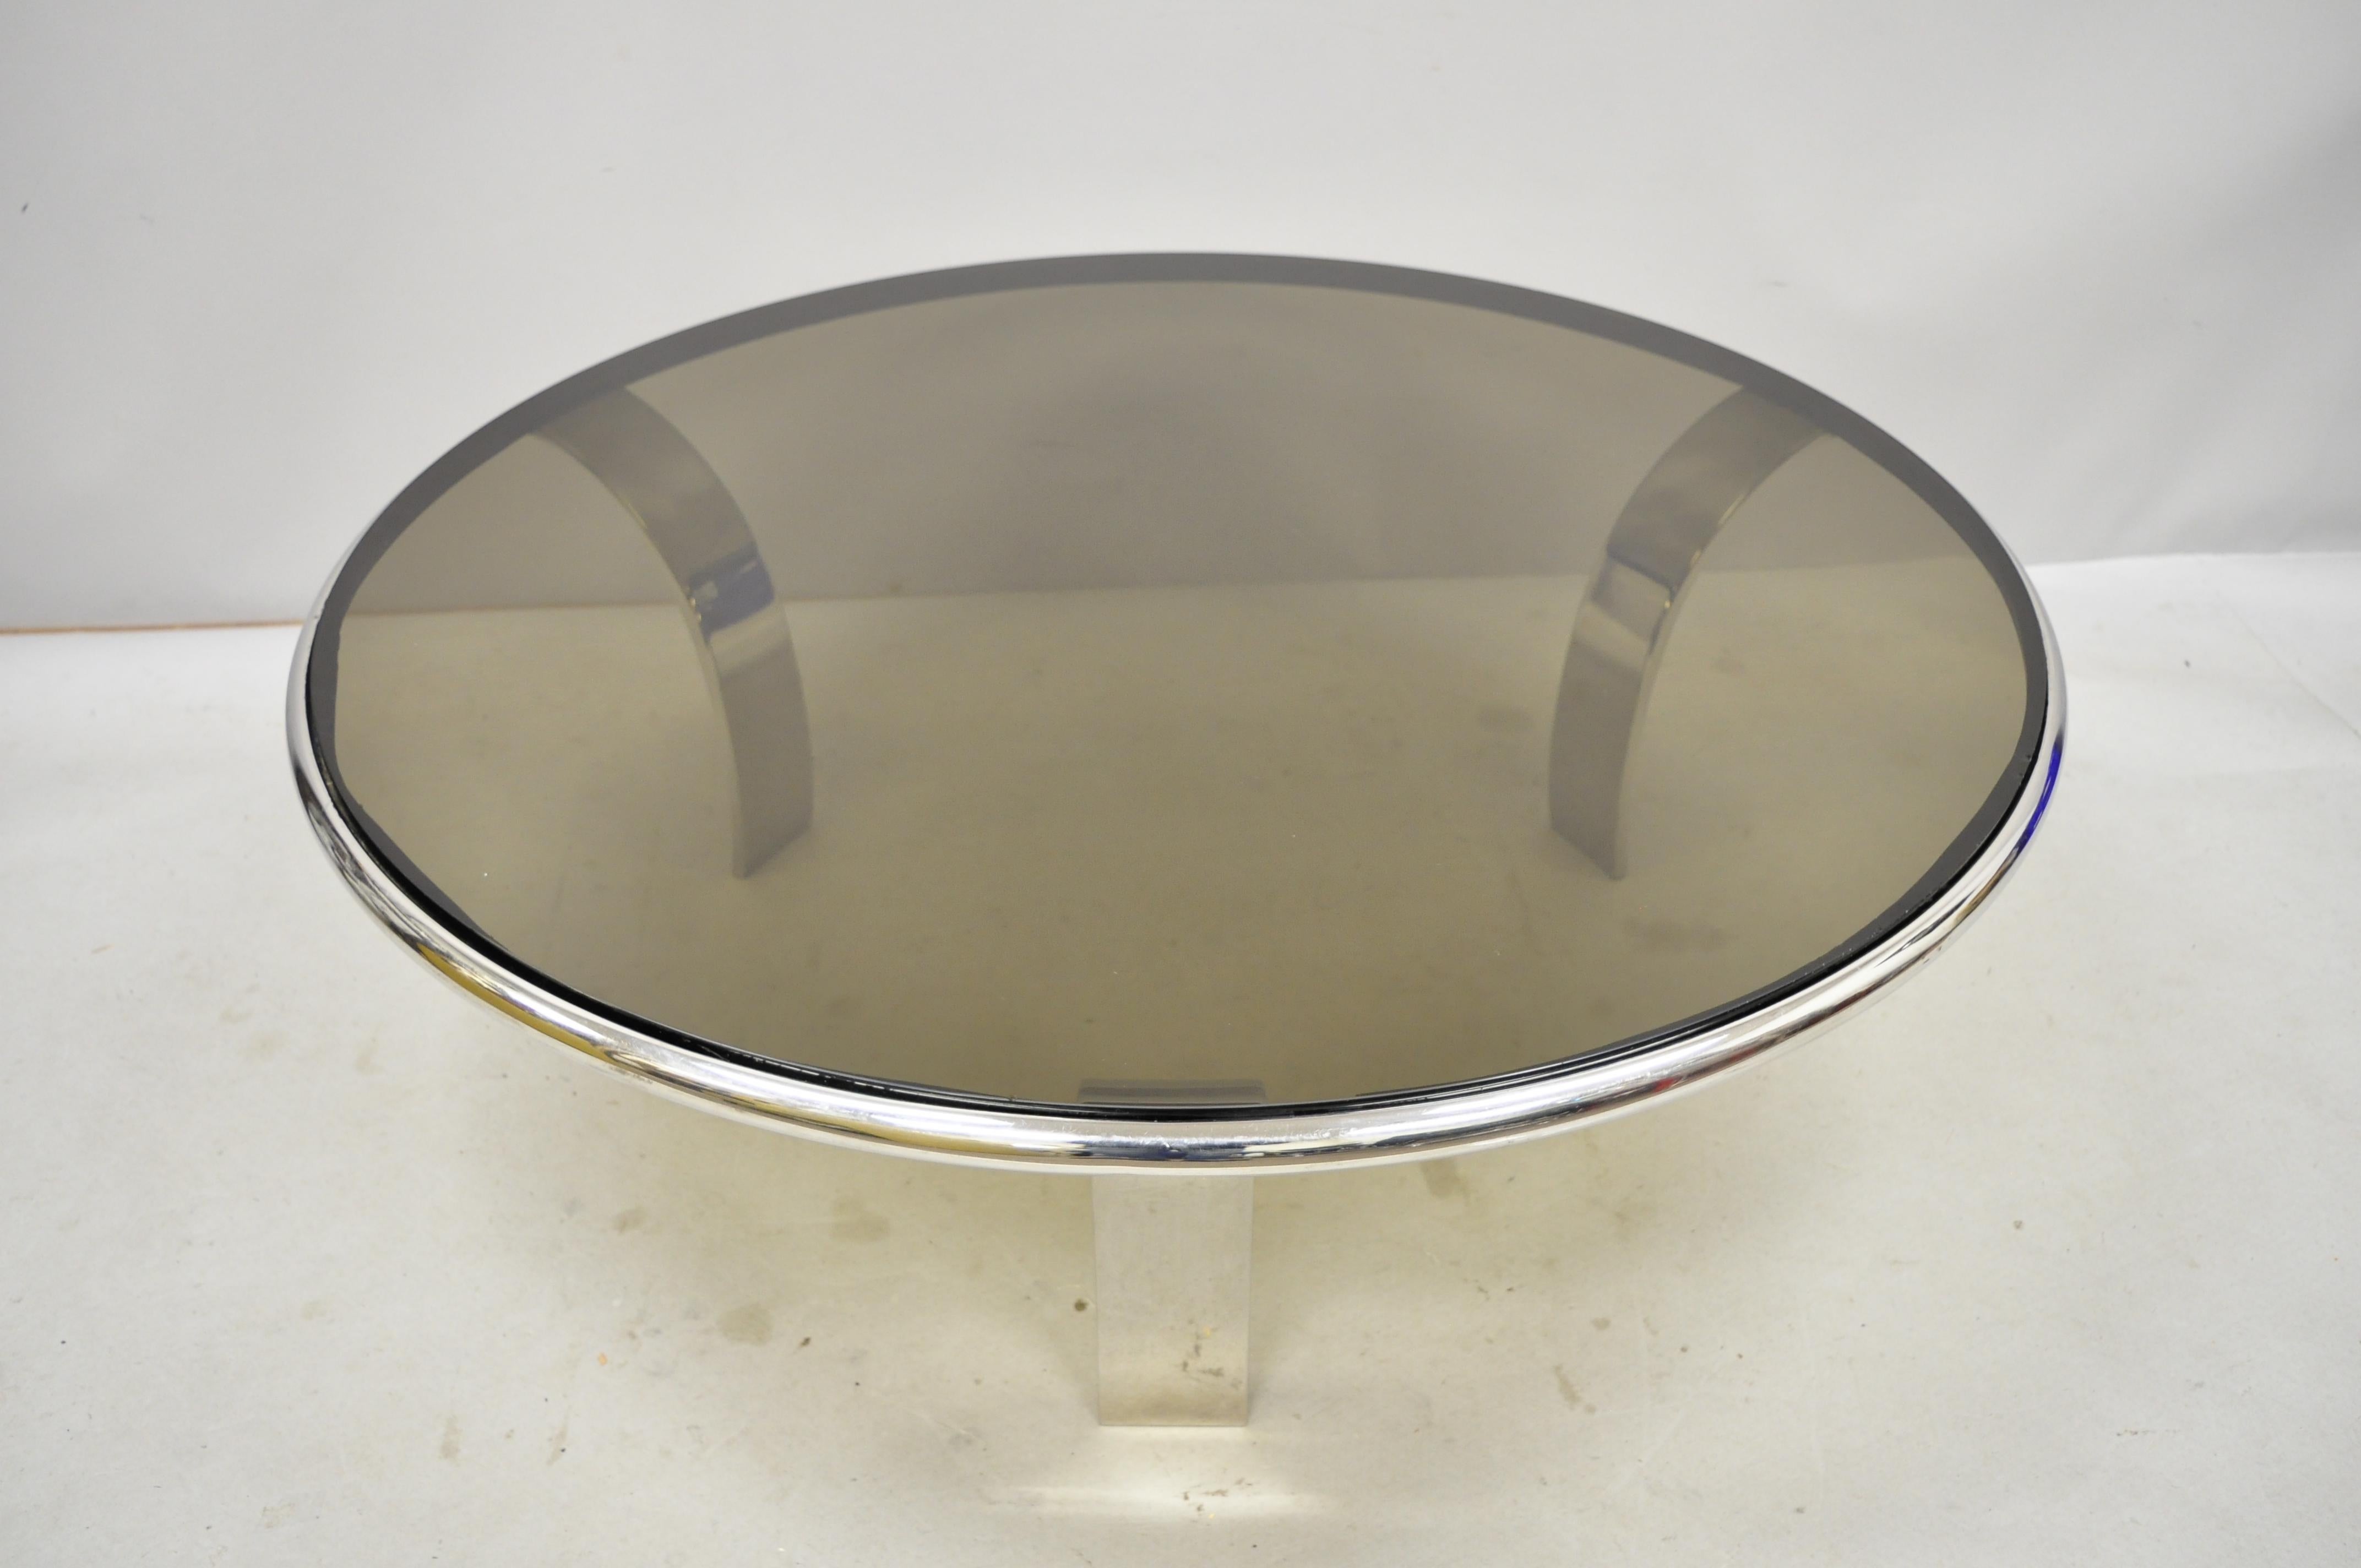 Gardner leaver for steelcase chrome steel round smoked glass coffee table. Listing includes a heavy chrome plated steel frame, curved legs, round smoked glass top, clean modernist lines, sleek sculptural form, circa mid-20th century. Measurements: